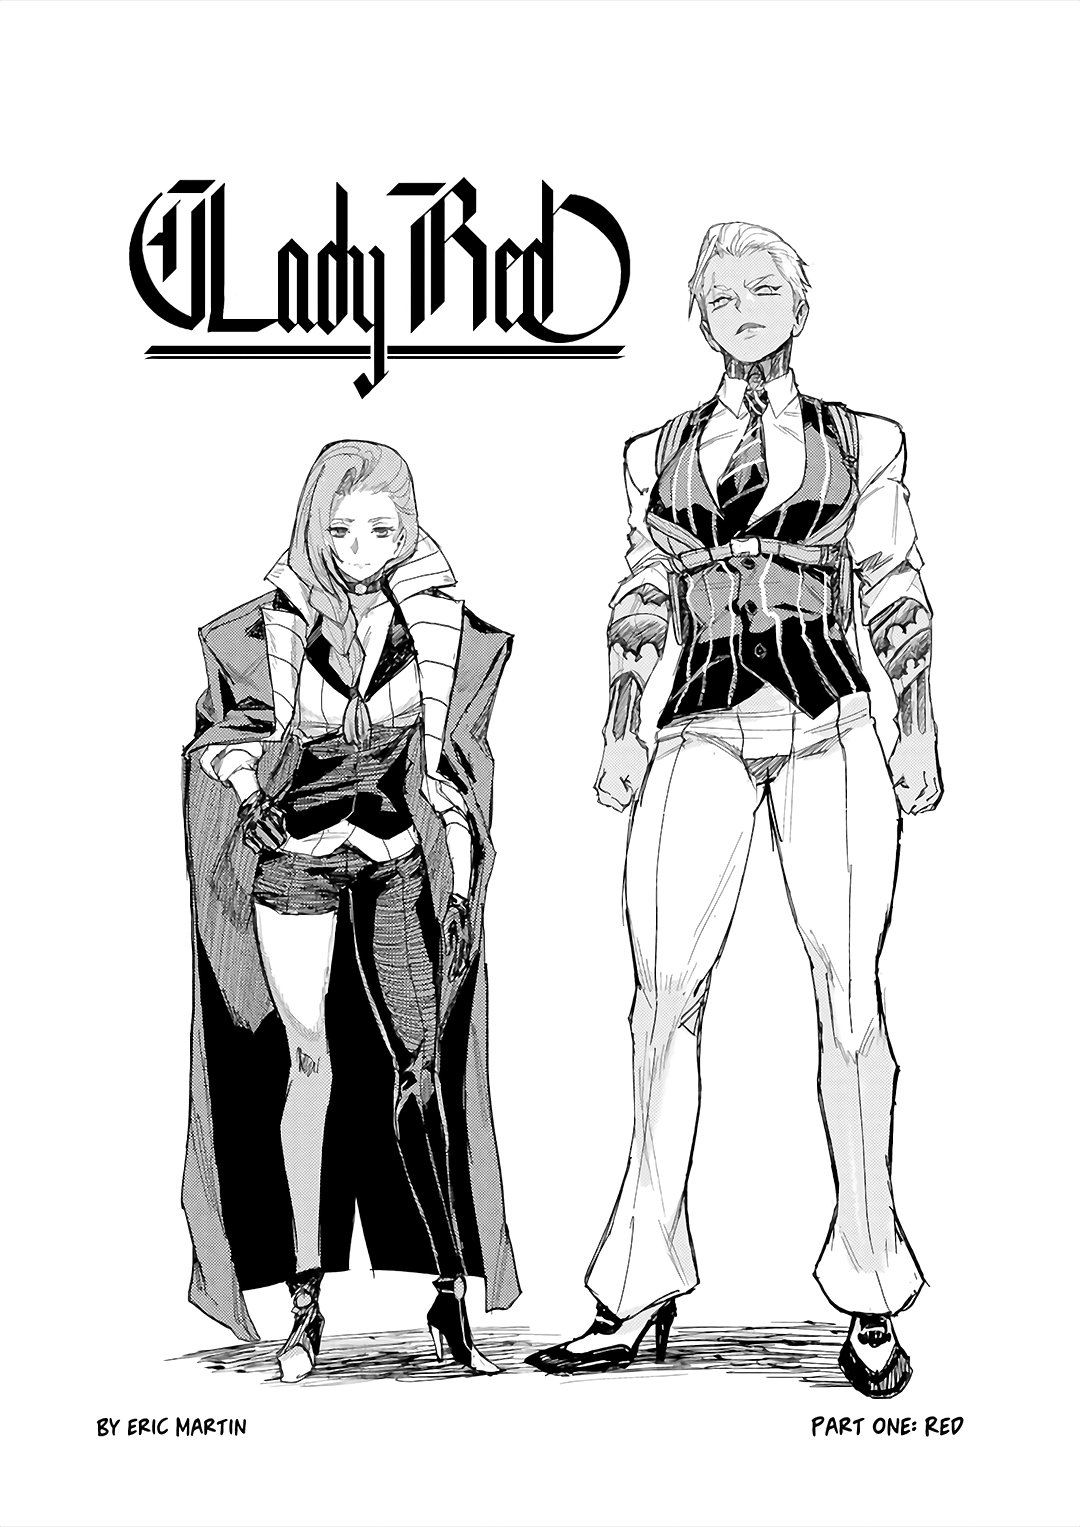 Lady Red Ch. 1 Part One